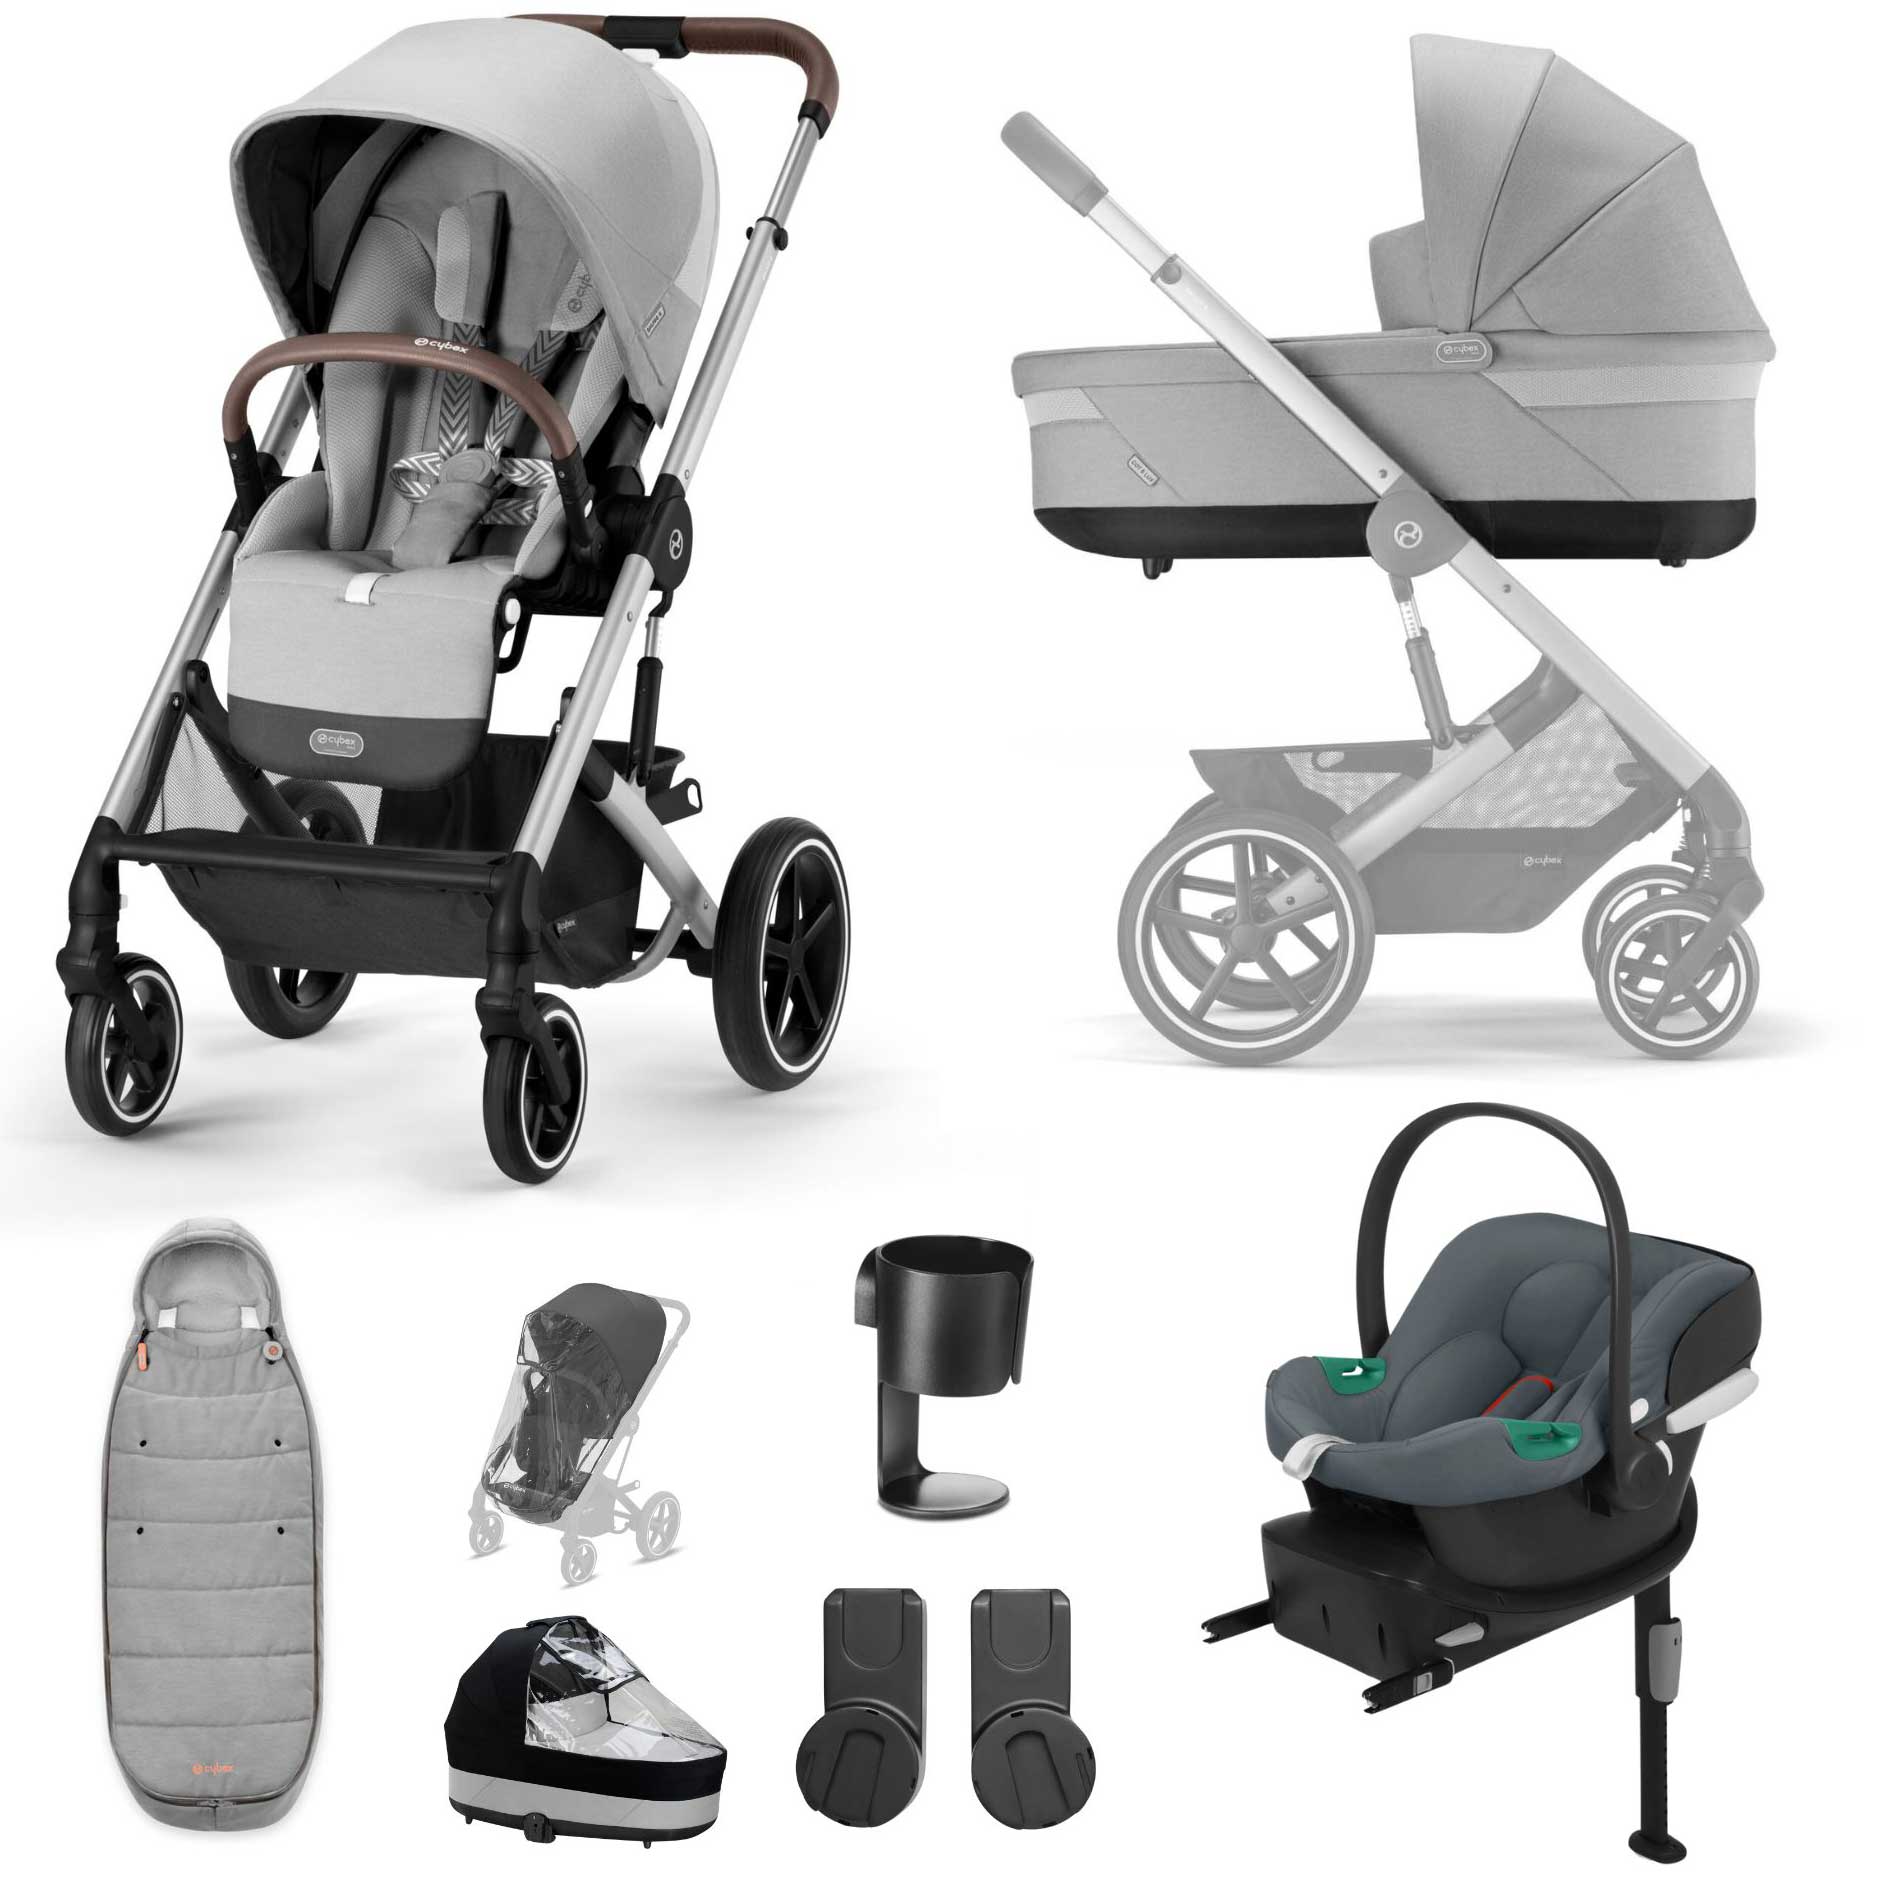 Cybex Balios S Lux Comfort Bundle in Silver/Lava Grey Travel Systems 127456-SLV-LAV-GRY 4063846317967